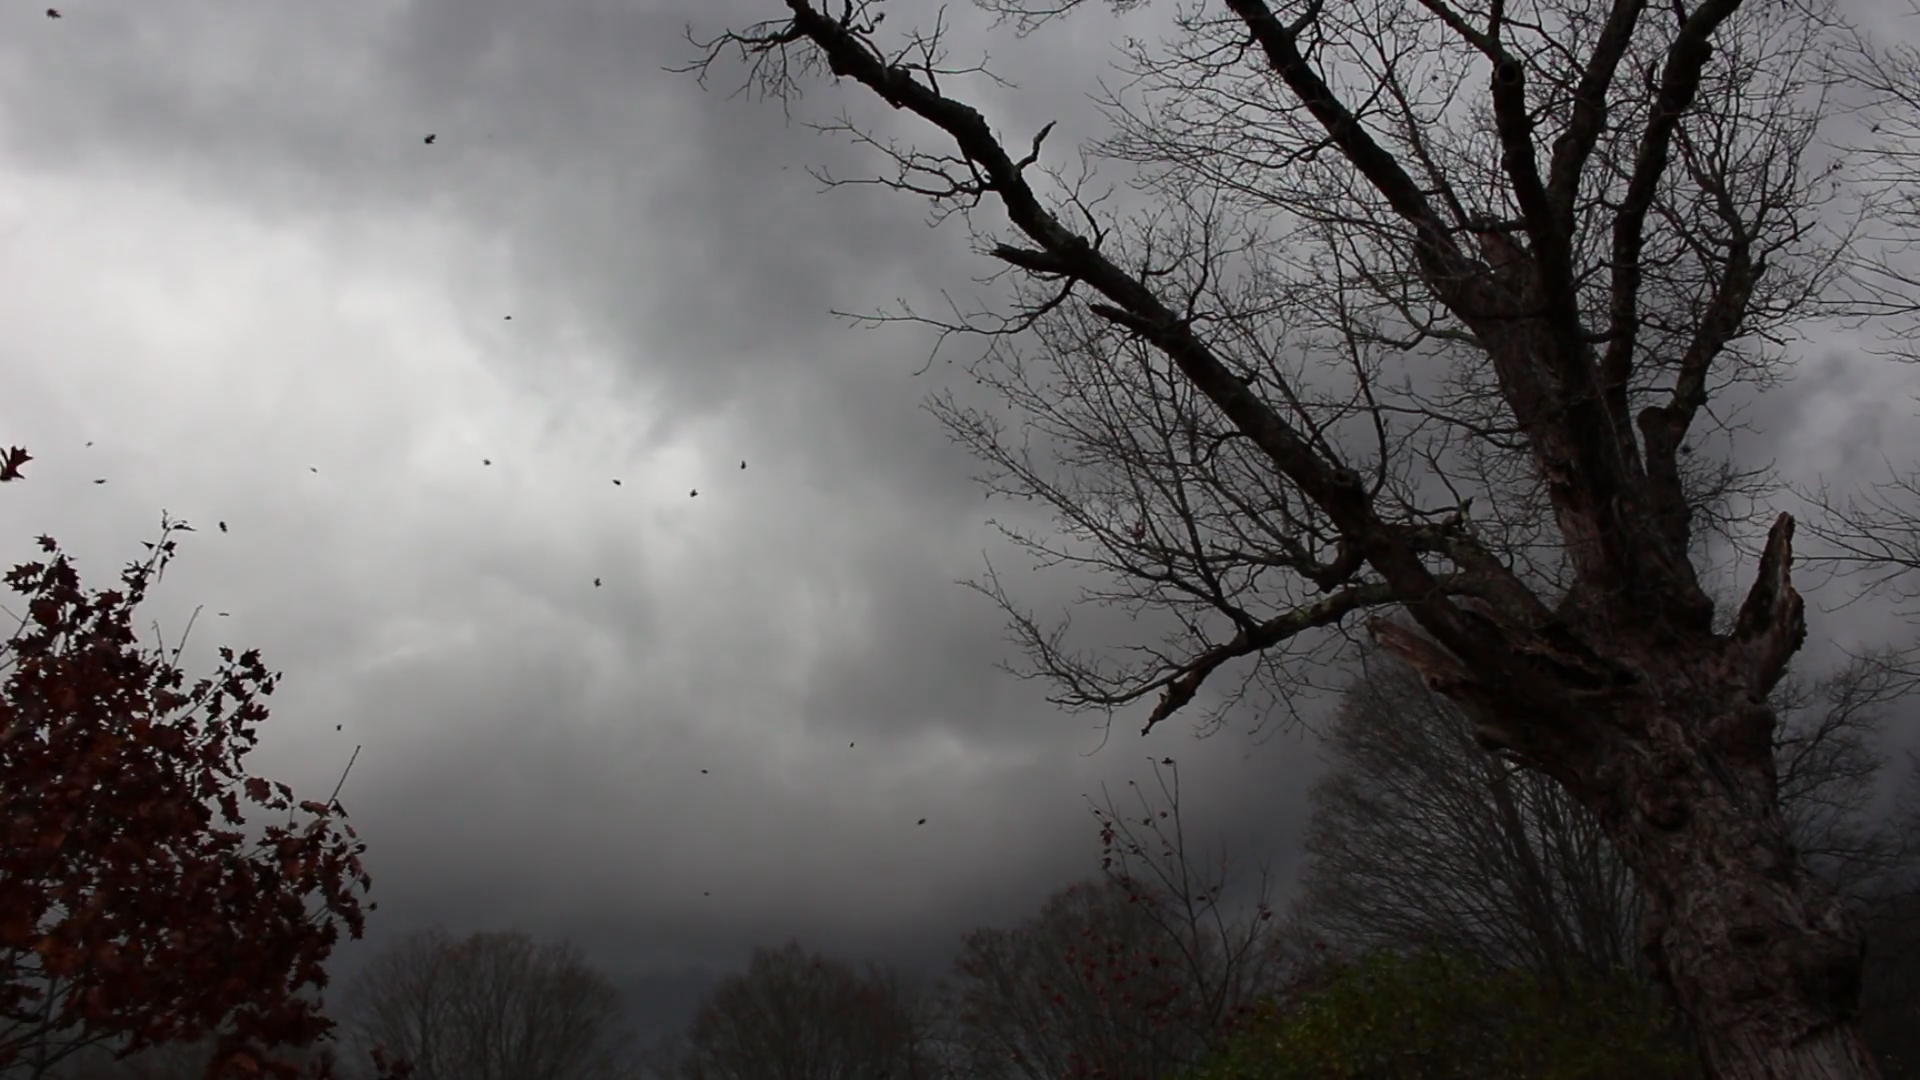 videoblocks-moody-trees-with-stormy-skies-and-winds_b37qs9amg_thumbnail-full01